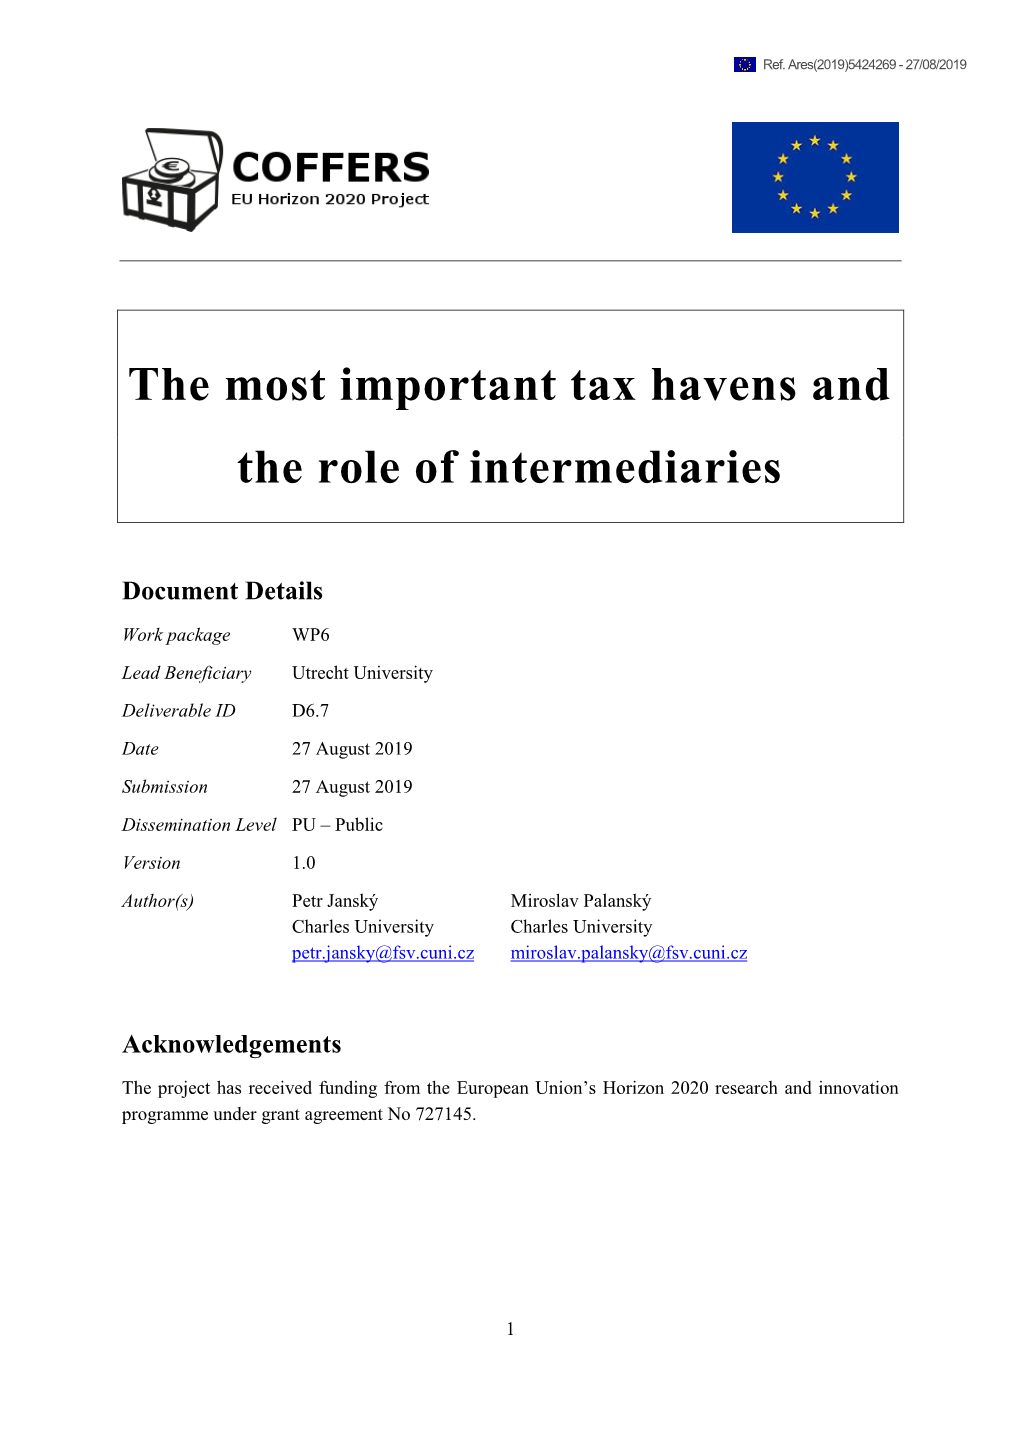 The Most Important Tax Havens and the Role of Intermediaries Petr Janský1, Miroslav Palanský1